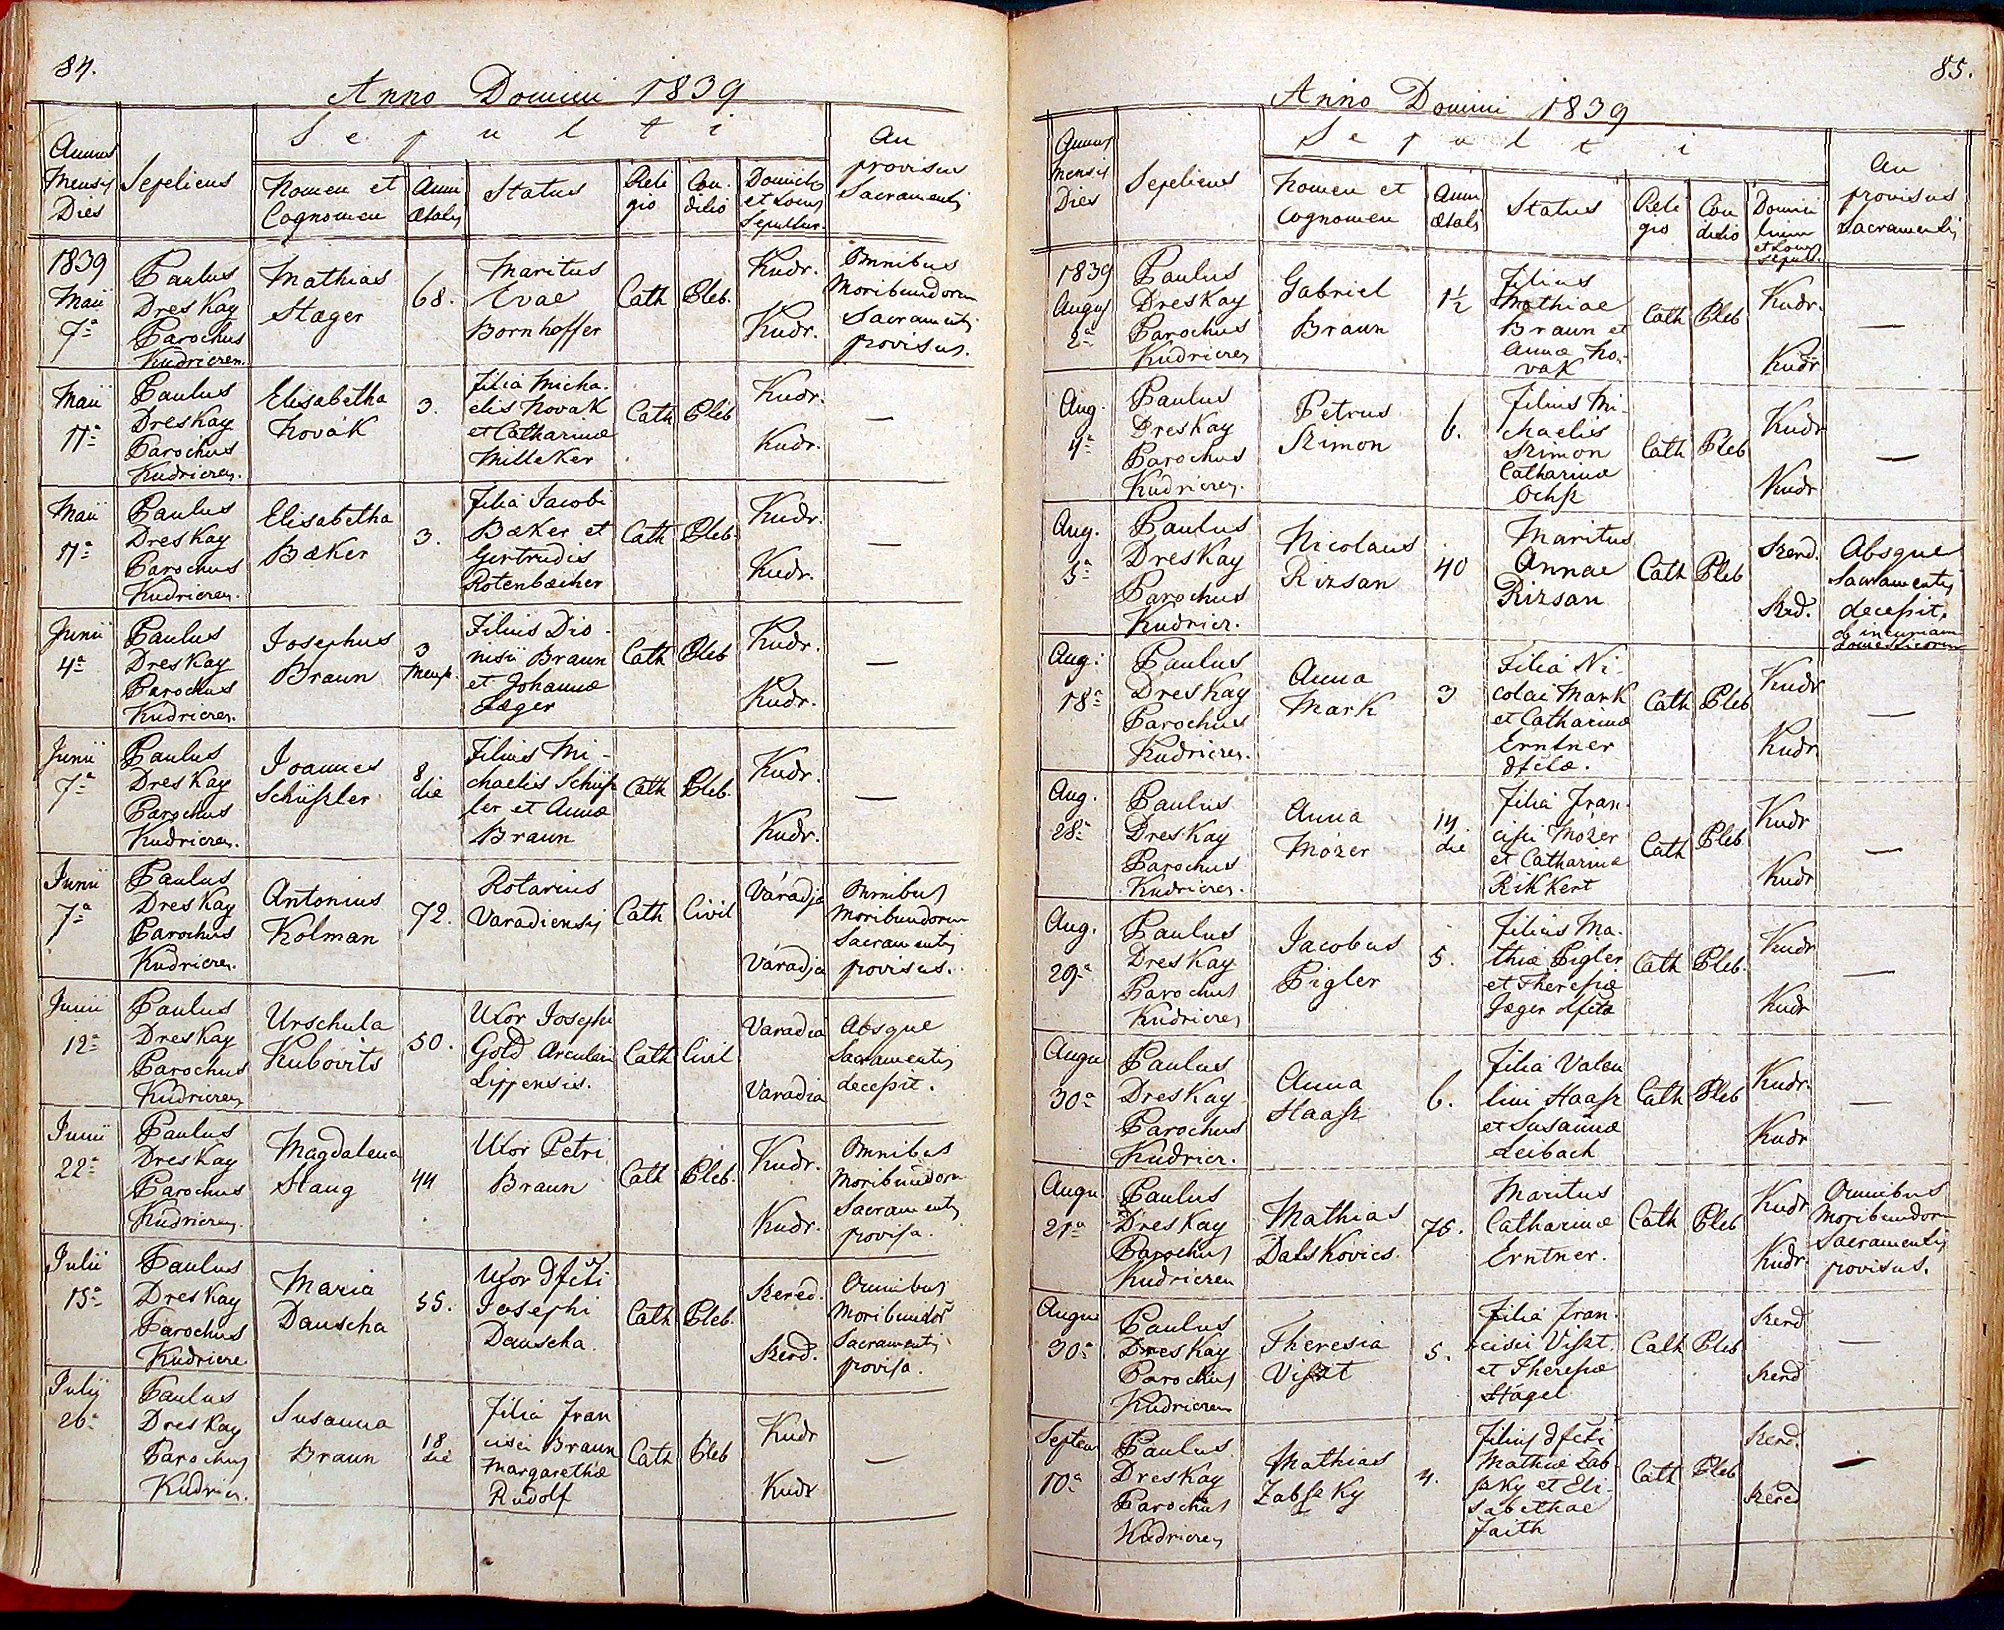 images/church_records/DEATHS/1775-1828D/084 i 085